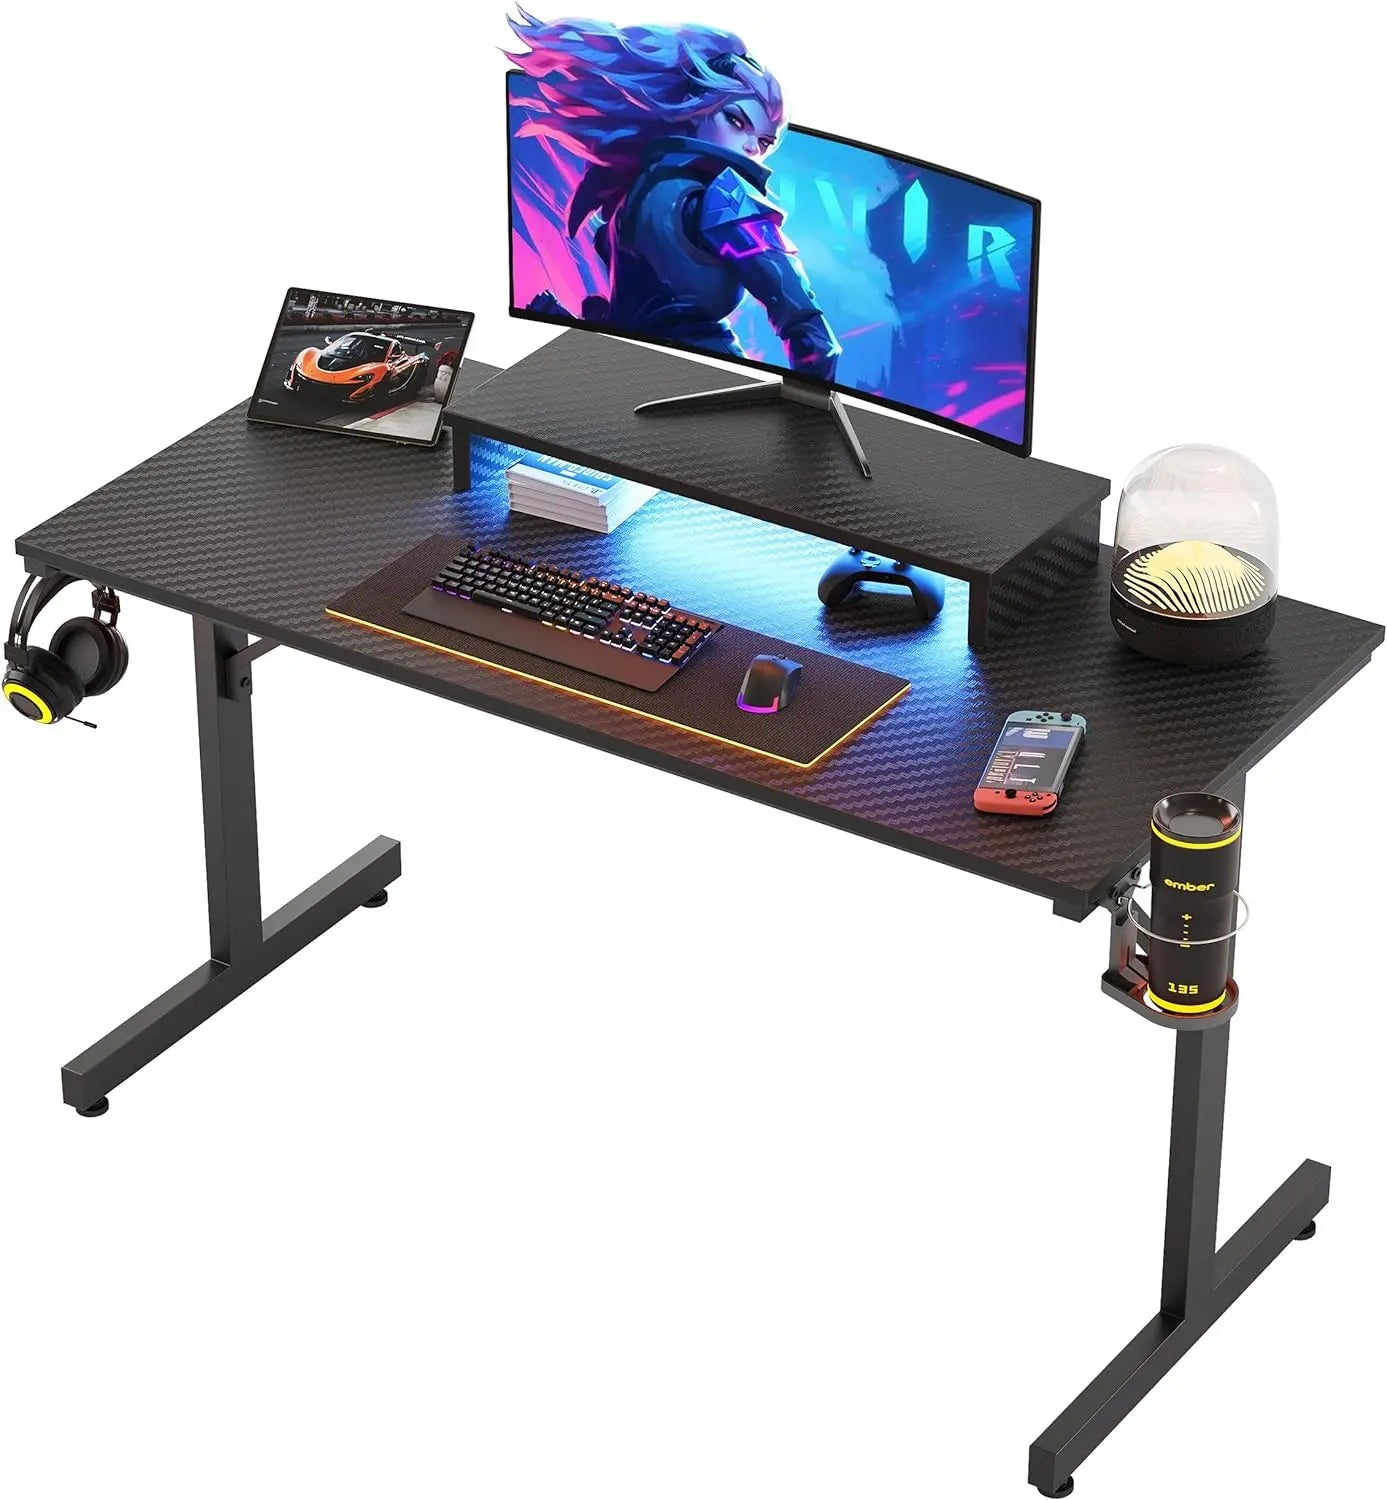 Bestier 42 inch Small Gaming Desk with Monitor Stand